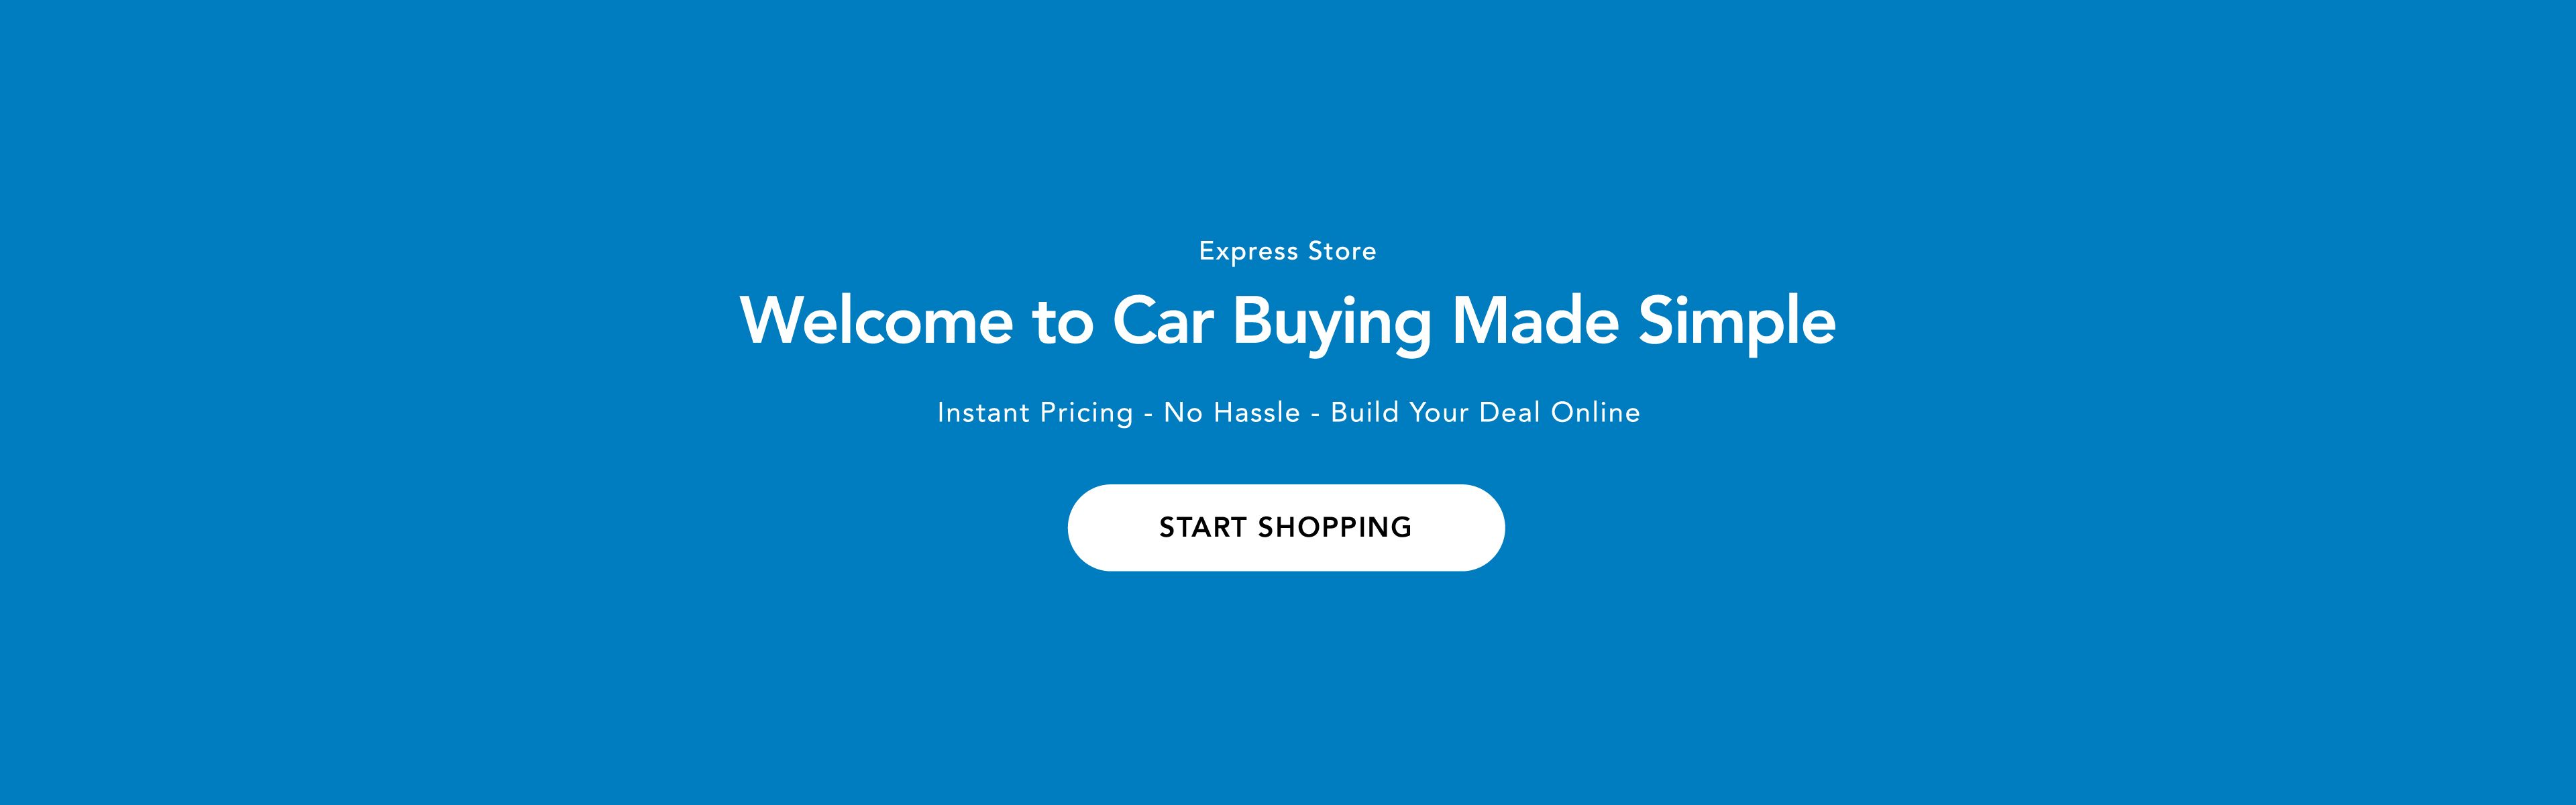 Express store car buying made simple